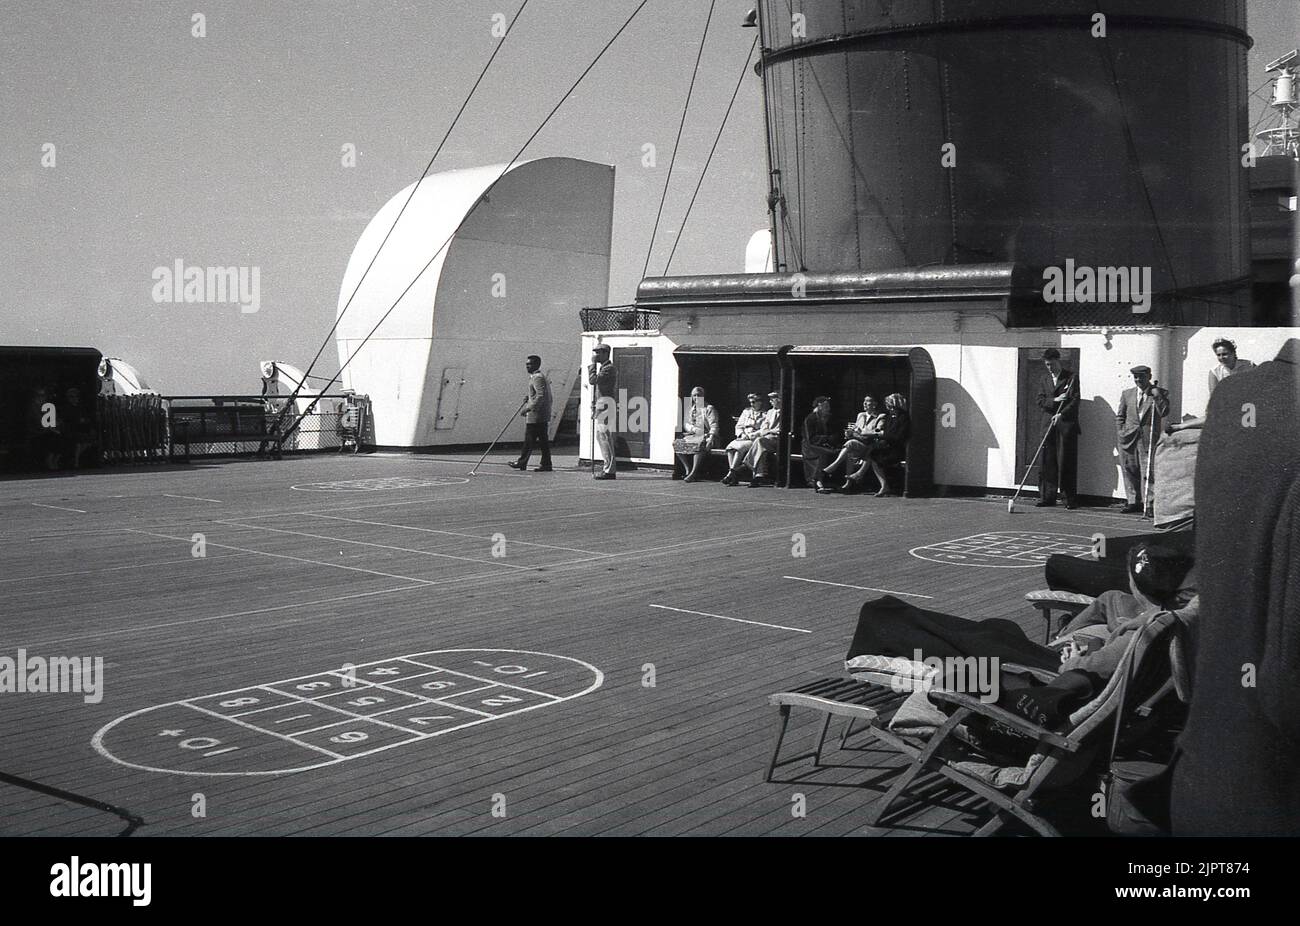 1950s, historical, passengers on a steamship, some holding long poles, playing a deck game, shuffle-board, other travellers sitting in little covered shelters watching the play. At the side of the deck, passengers lying in wooden lounger chairs with cunard embrodied chair blankets. Stock Photo